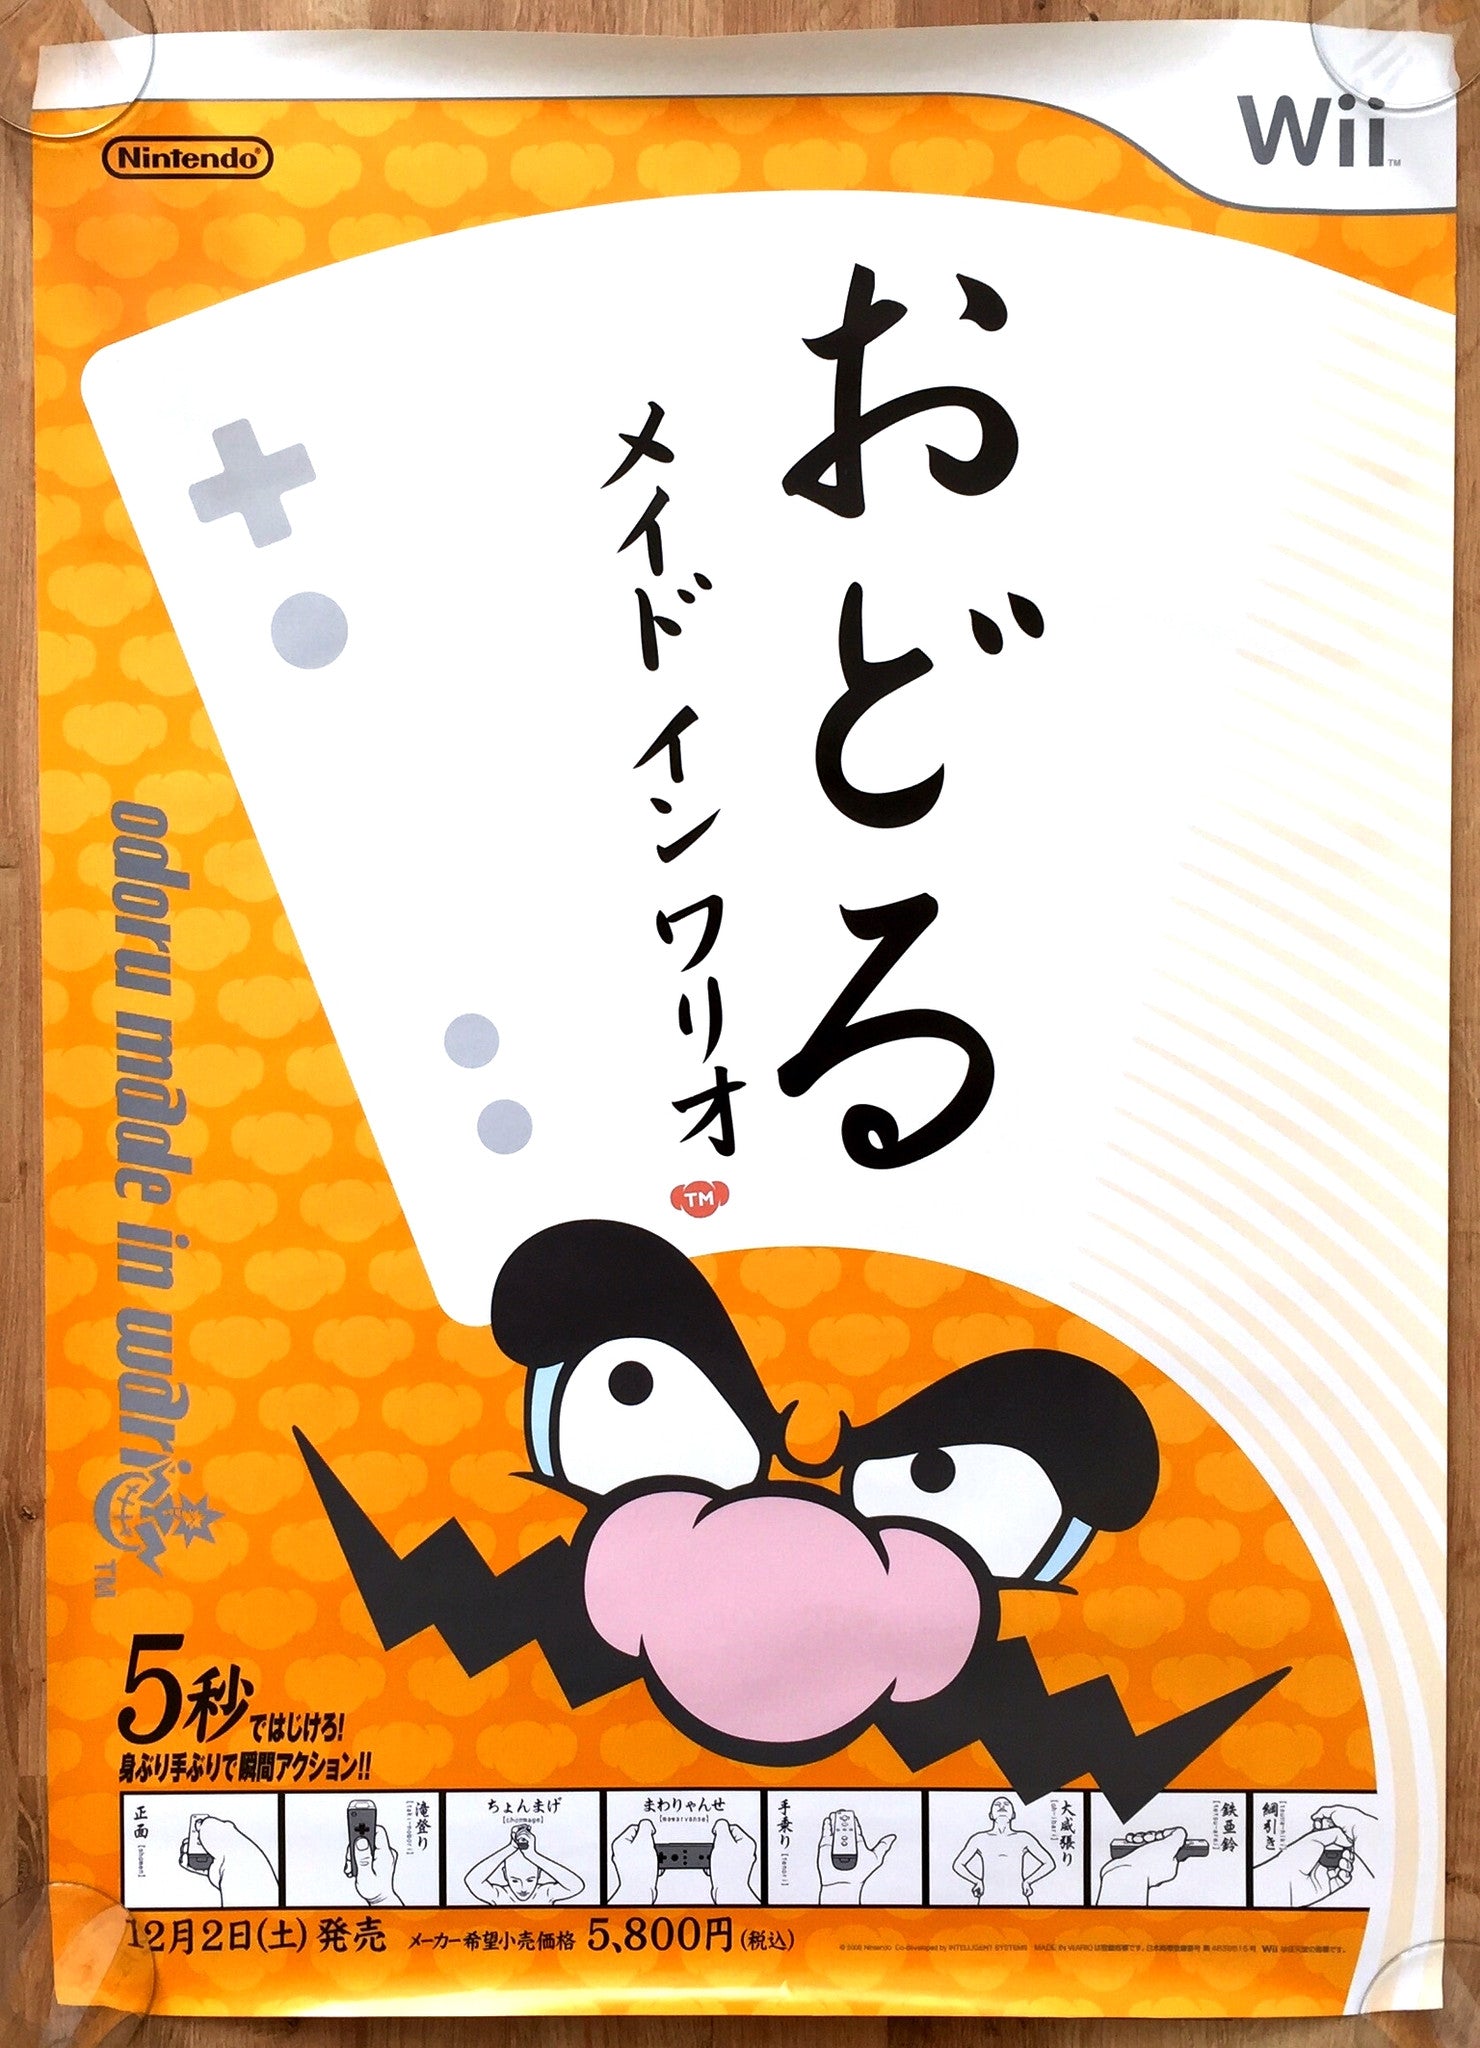 Wario Ware: Smooth Moves (B2) Japanese Promotional Poster